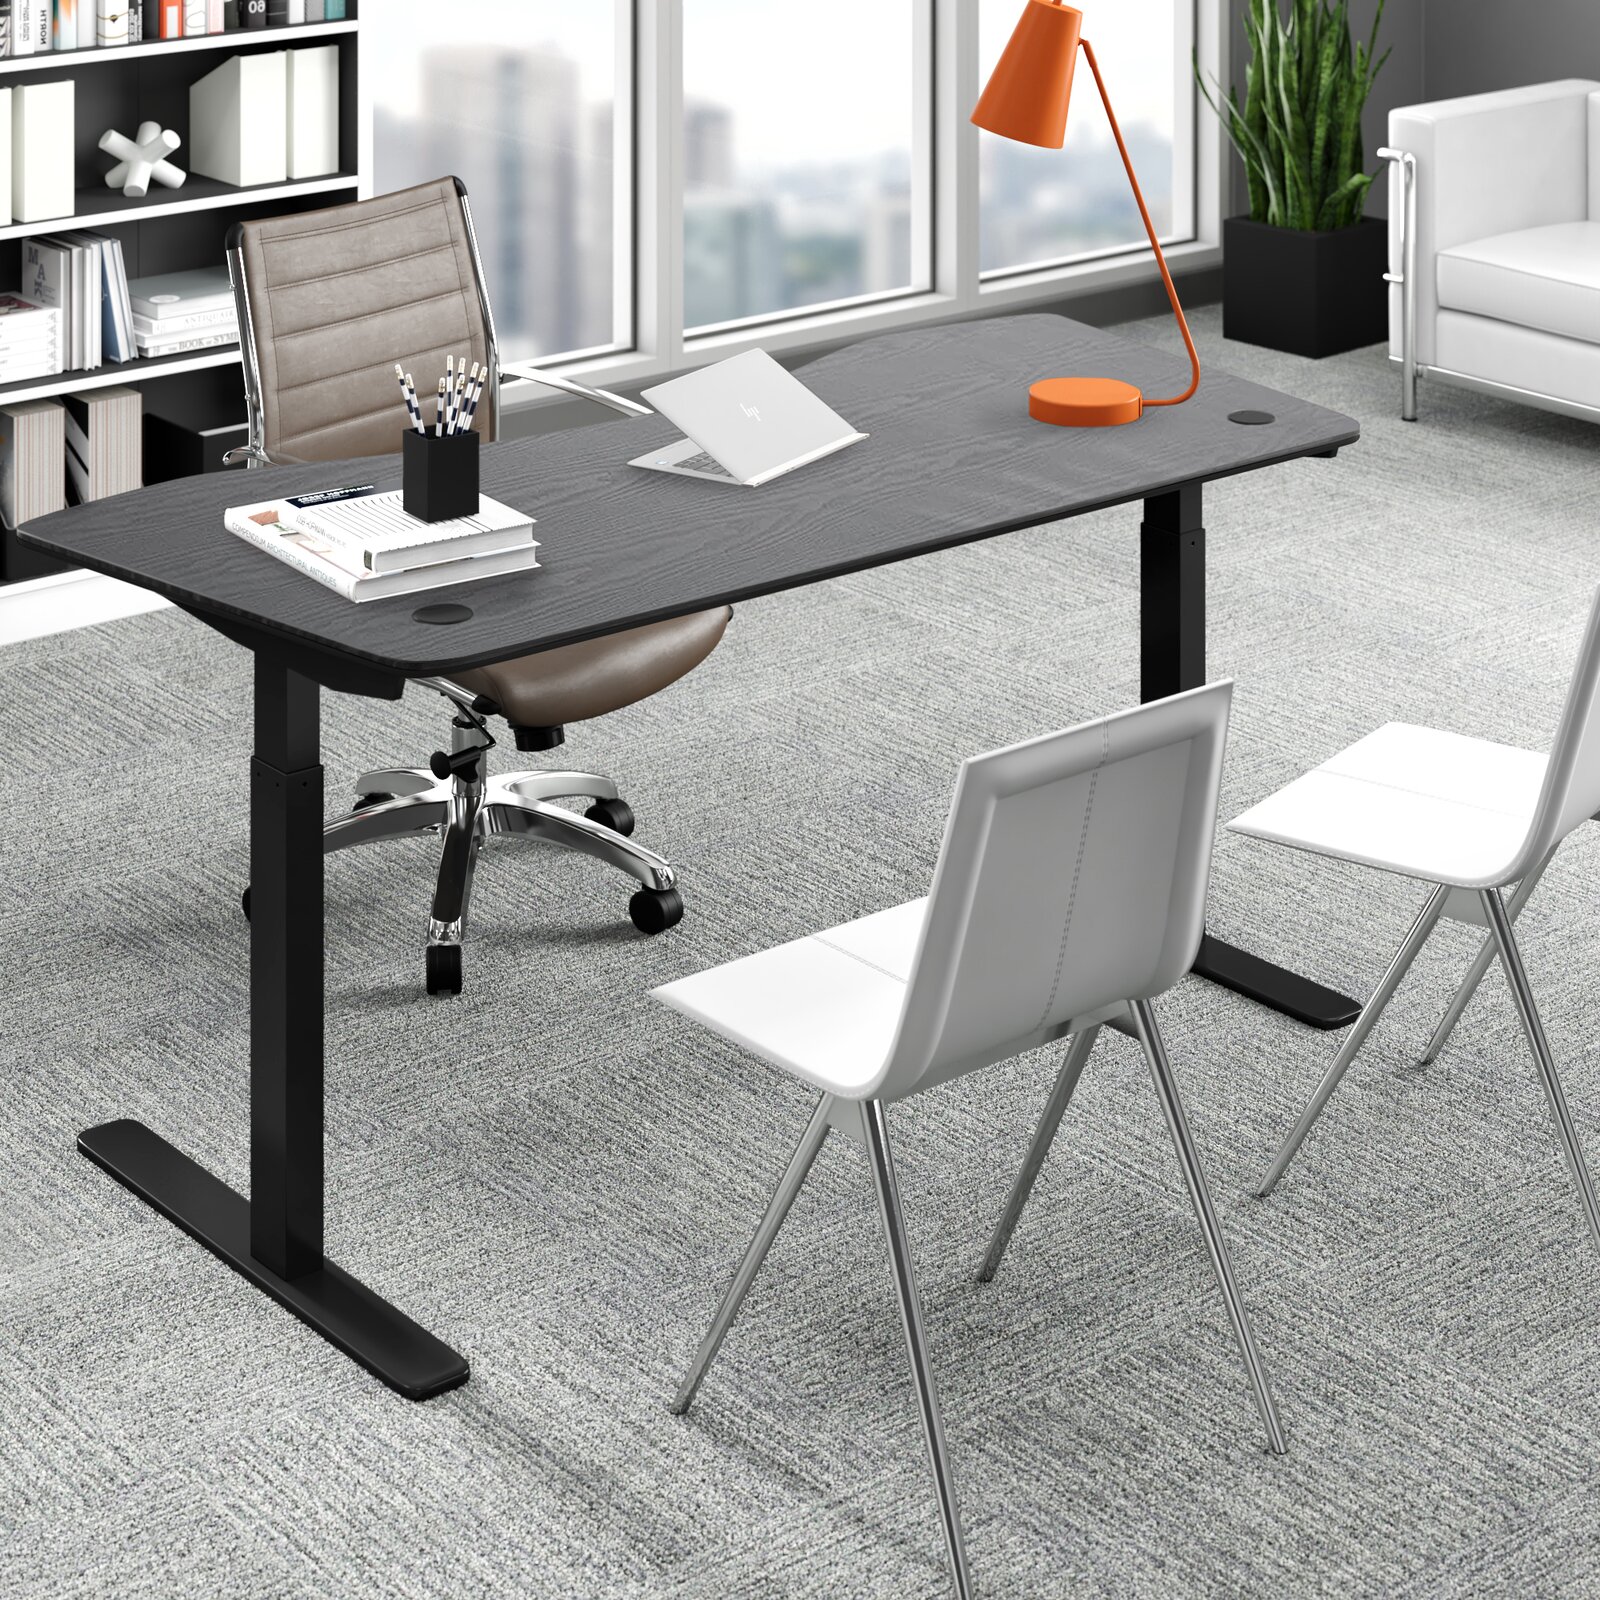 Review: Stir Kinetic smart desk makes you stand up